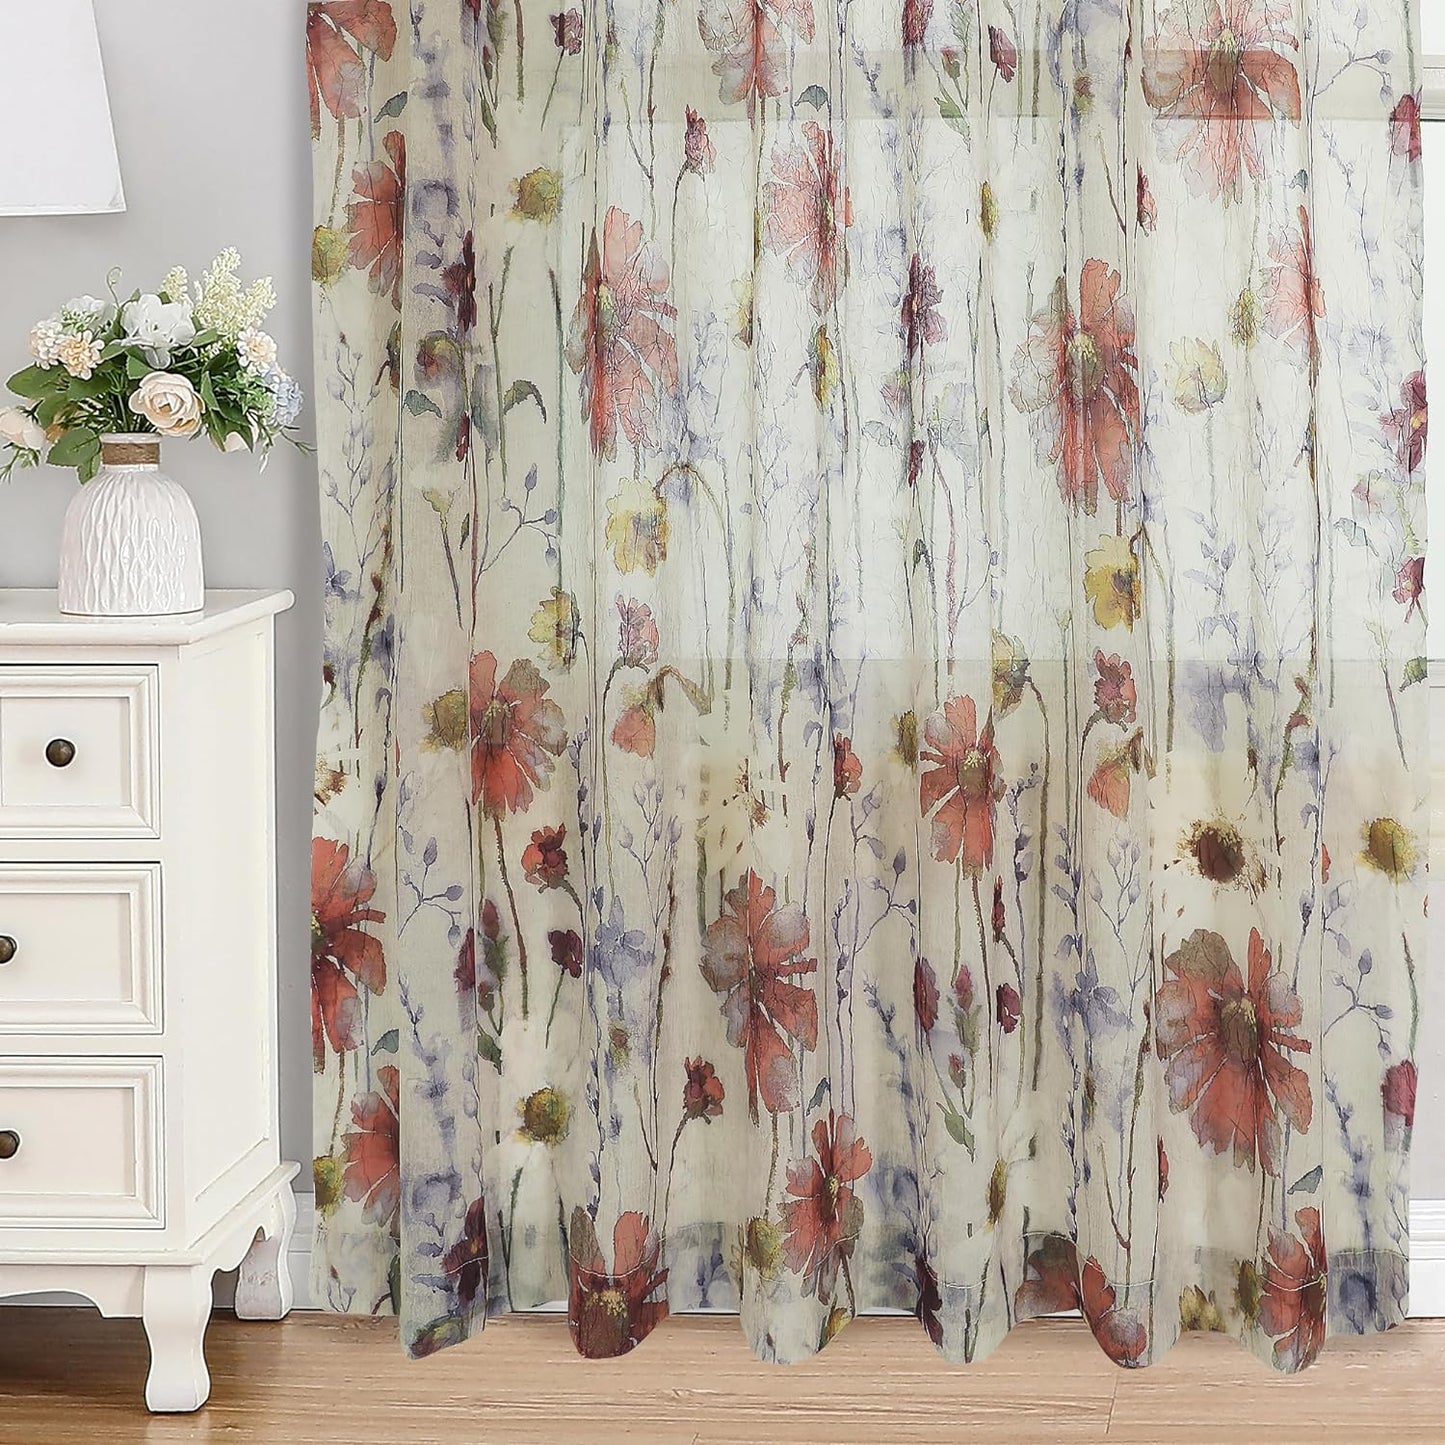 OWENIE Crushed Semi Sheer Curtains 72 Inches Length 2 Panels, Floral Pattern Design Rod Pocket Light Filtering Farmhouse Curtains for Bedroom Living Room, 2 Pieces Total 84 Inch Wide, 72 Inch Long  OWENIE Multi Color 42“W X 63"L | 2 Pcs 